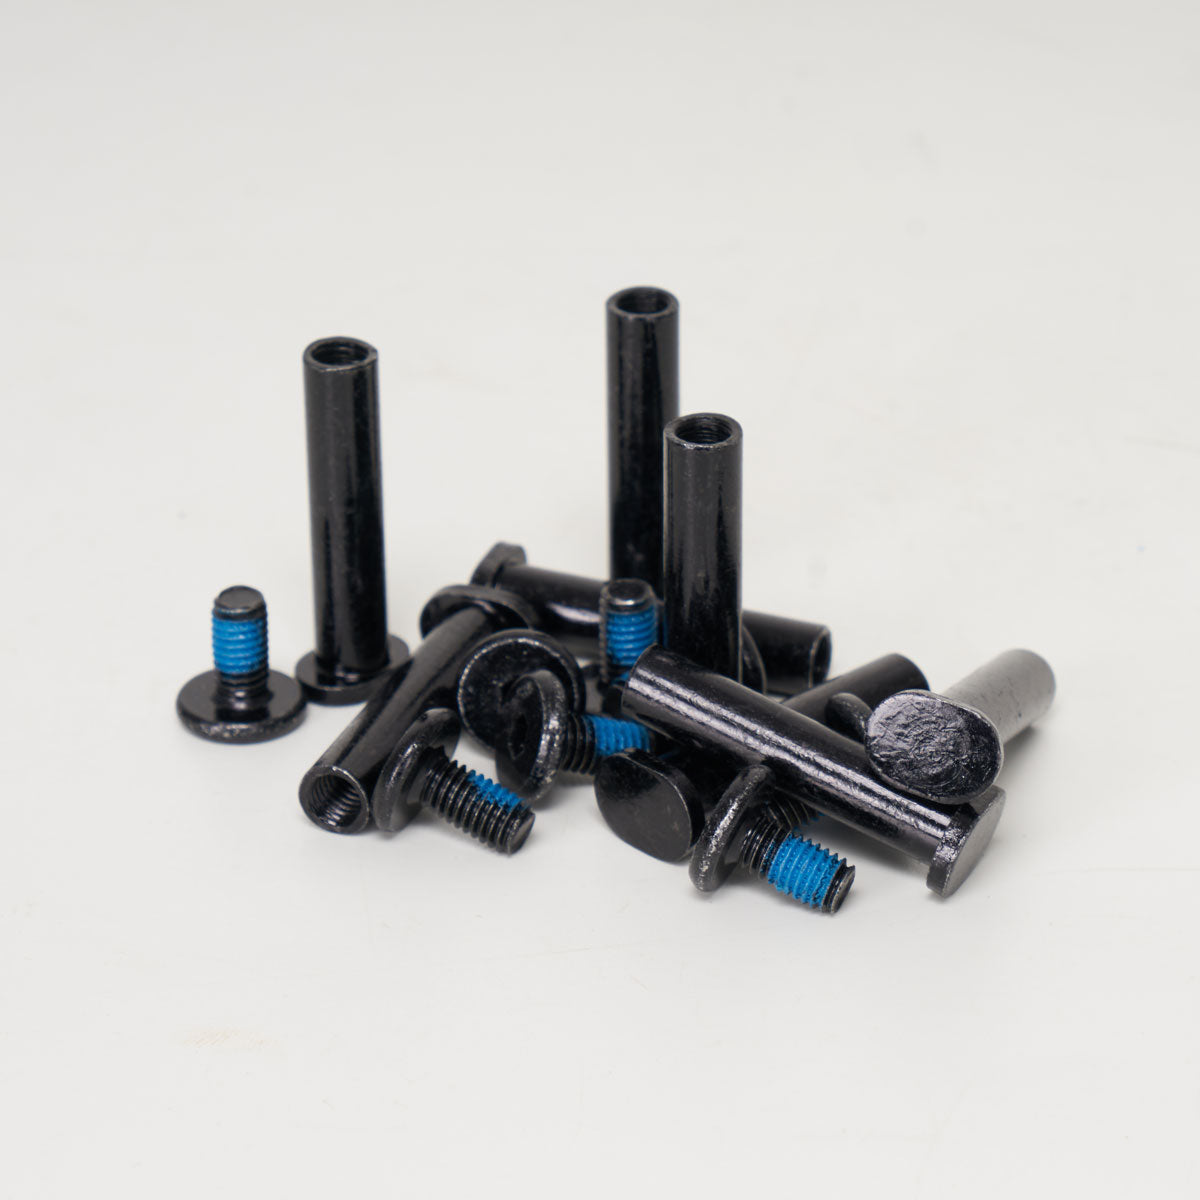 Fifty- 50 Axles for Prime and Balance 2 Frames - Replacement Bolts - Black